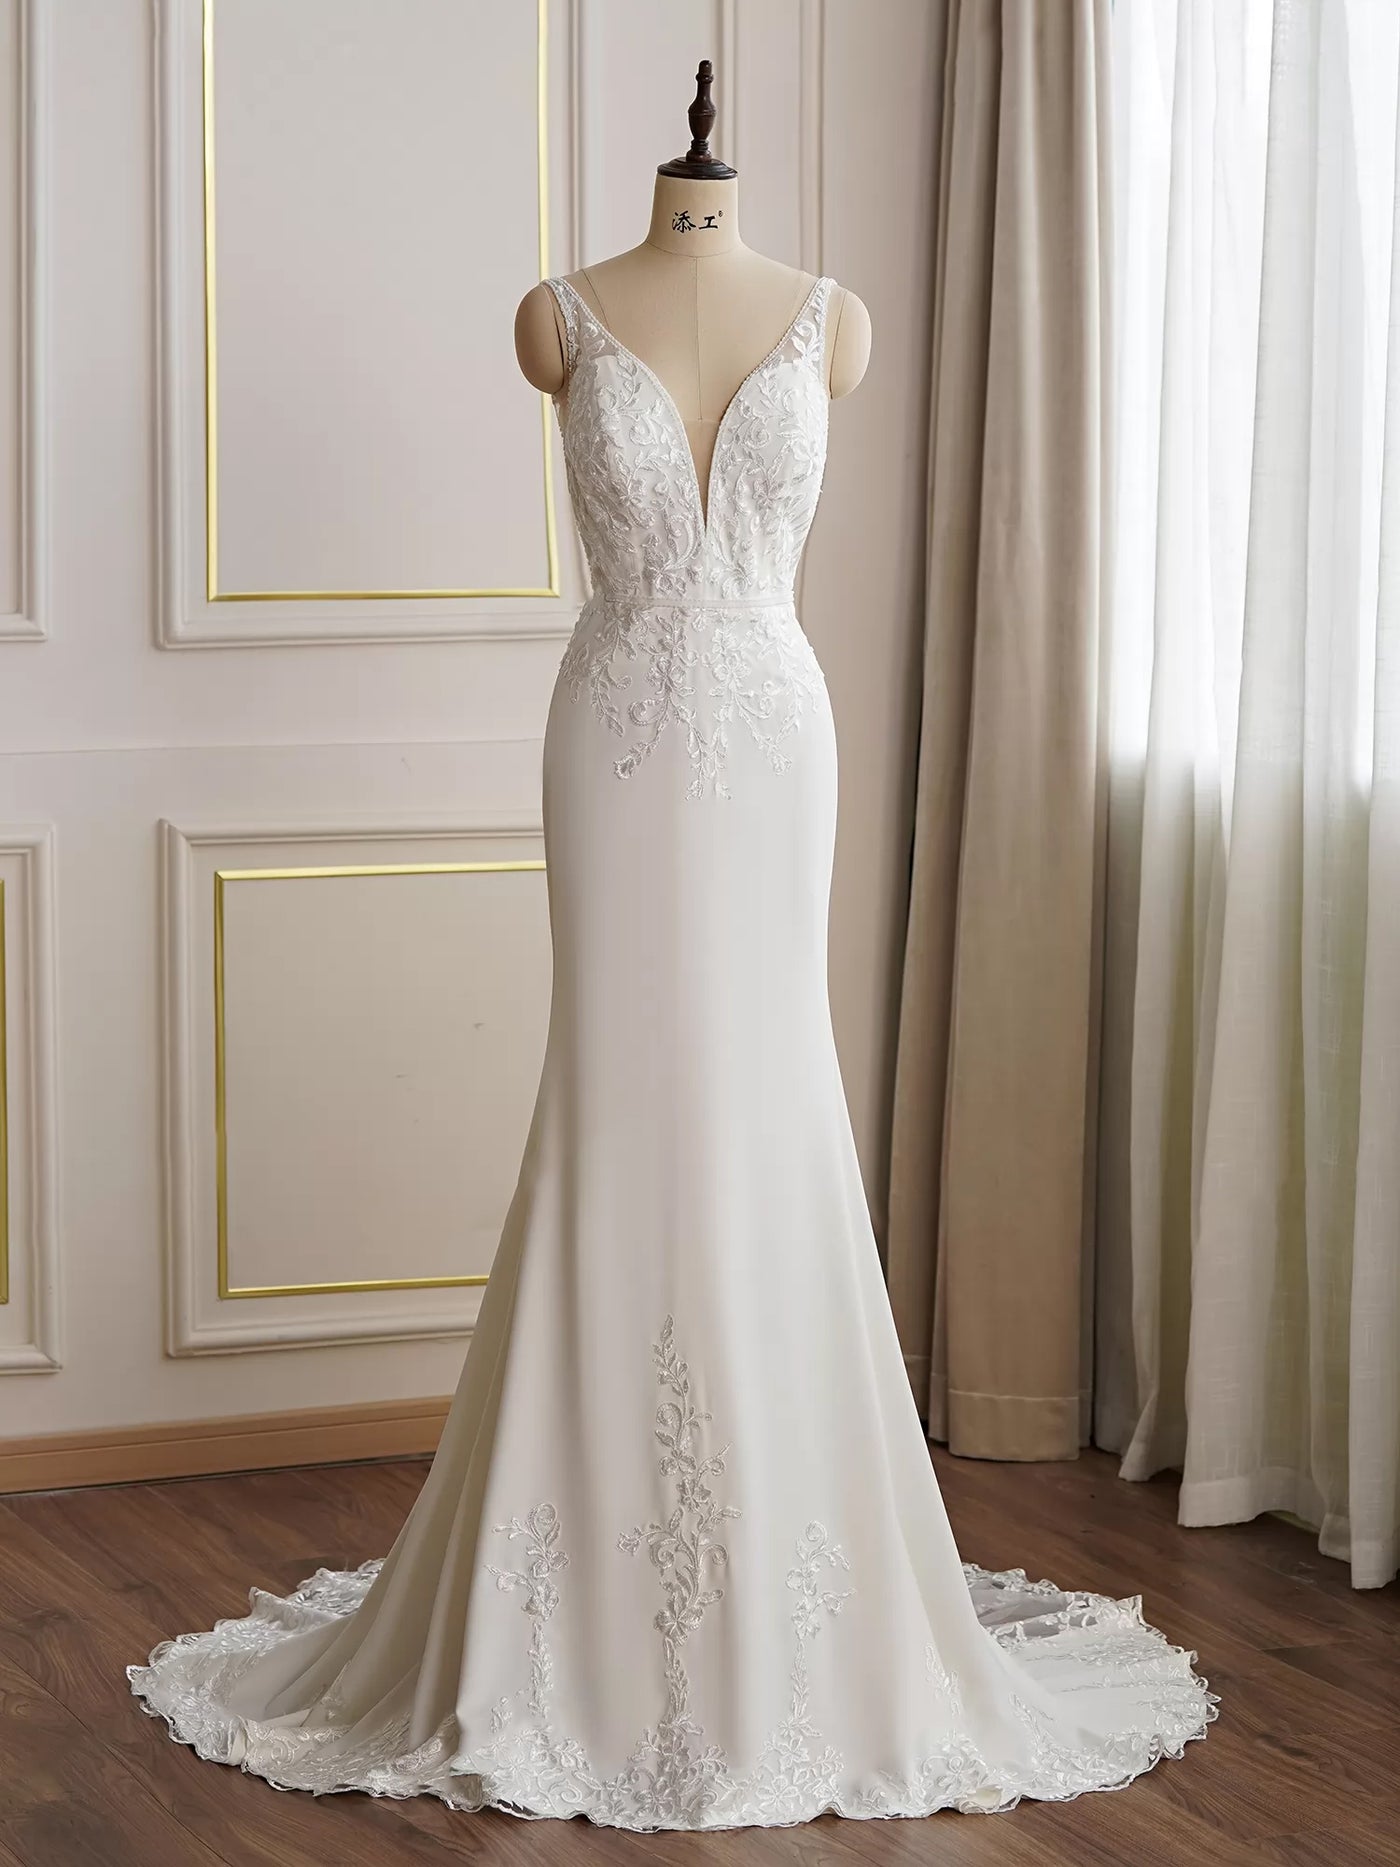 An elegant white wedding dress with lace detailing and a long train, displayed on a mannequin in a sophisticated Bergamot Bridal shop setting.